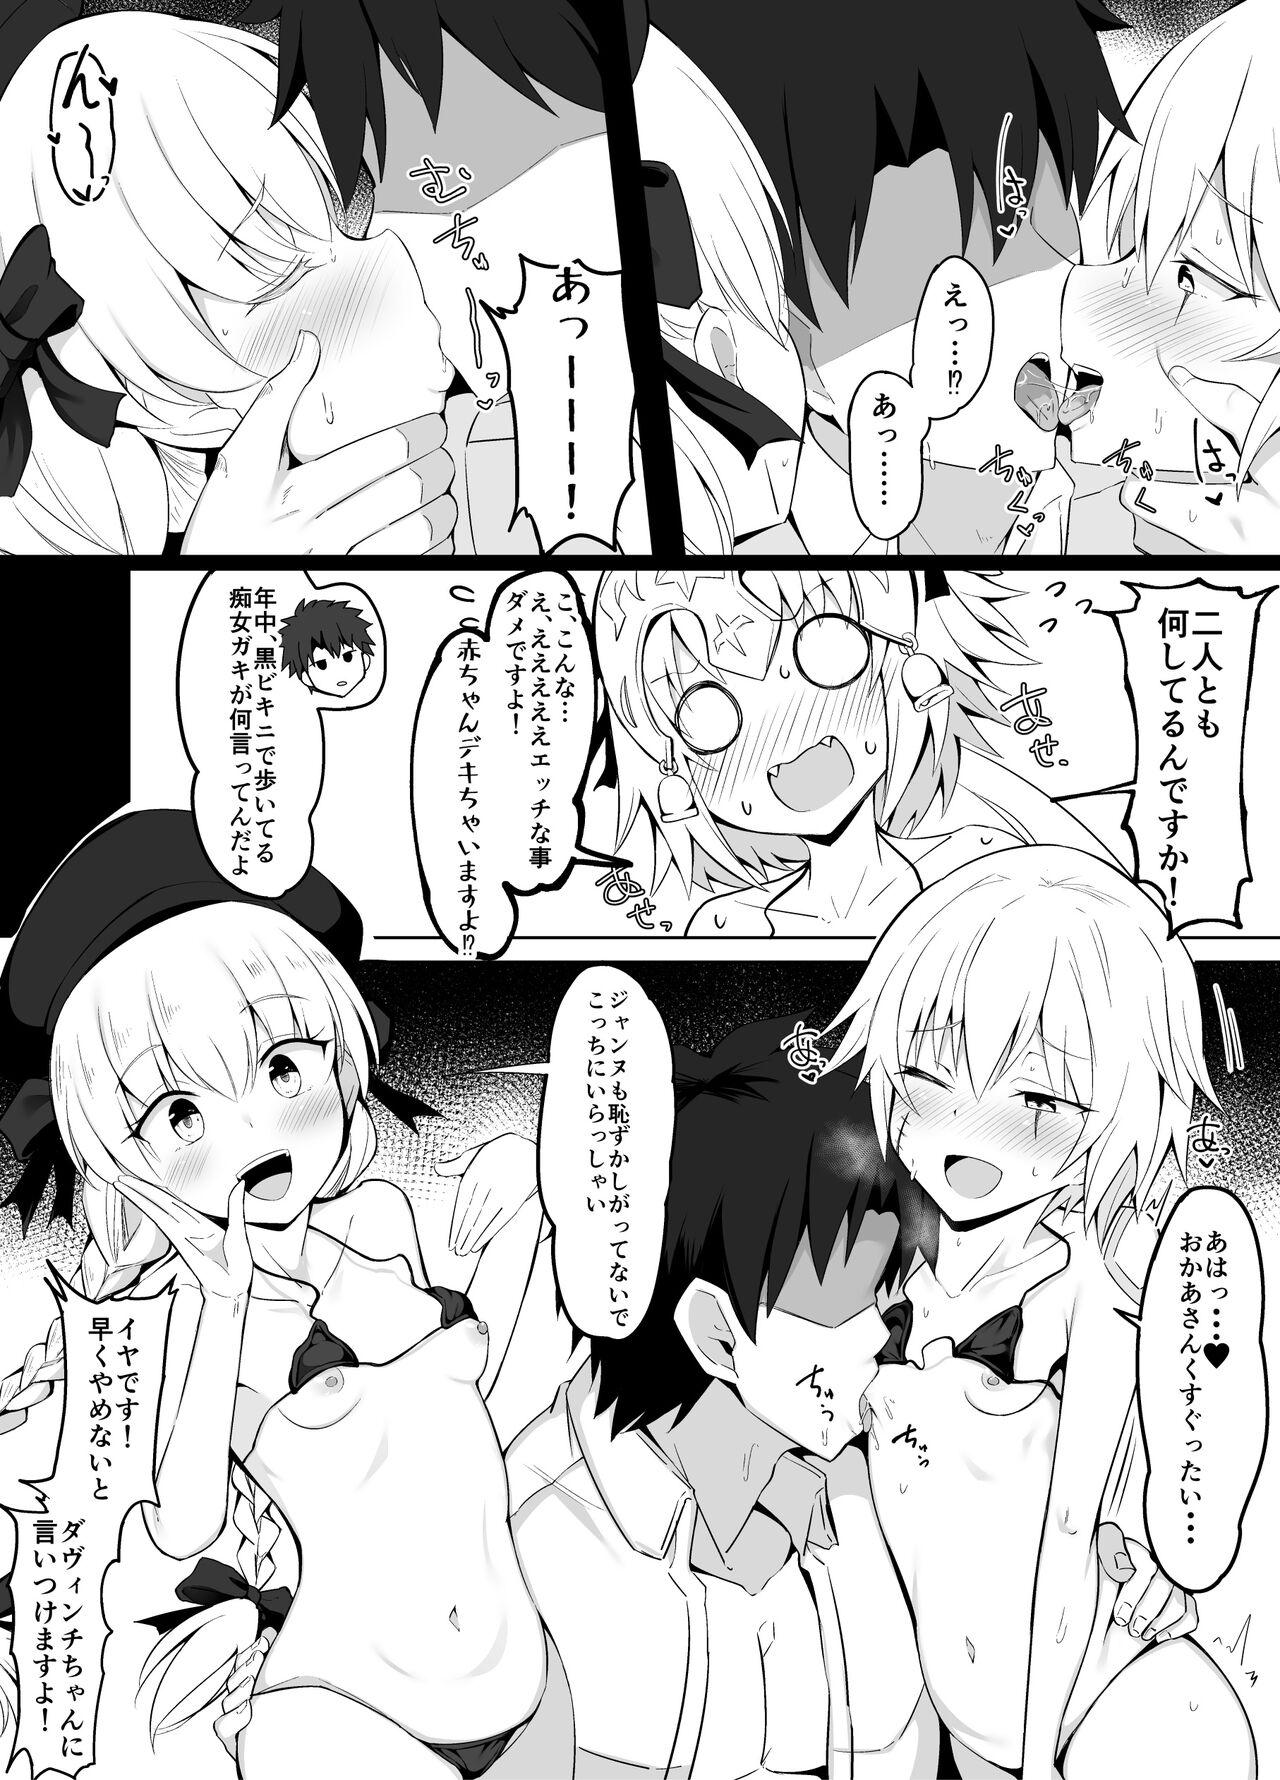 Milf Cougar カルデア・マイクロビキニ部 サマーリトル編 - Fate grand order Pussylicking - Page 2